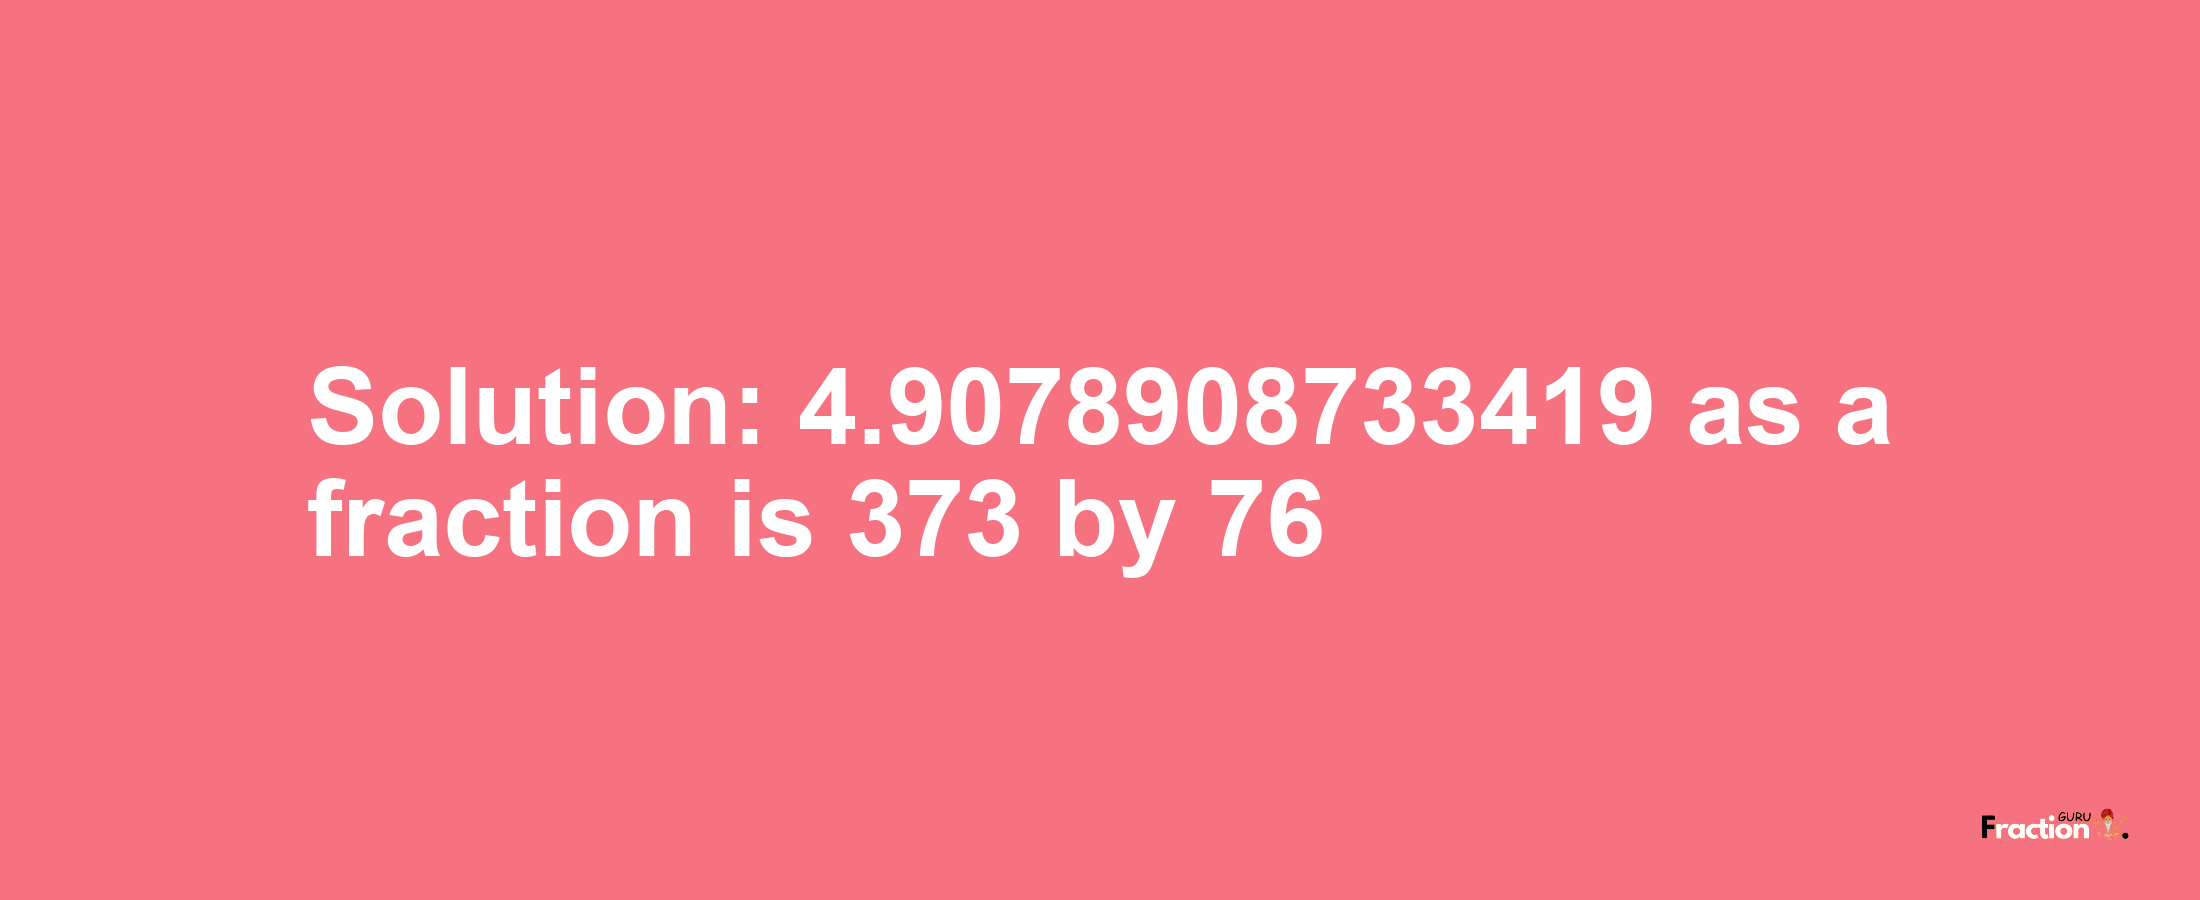 Solution:4.9078908733419 as a fraction is 373/76